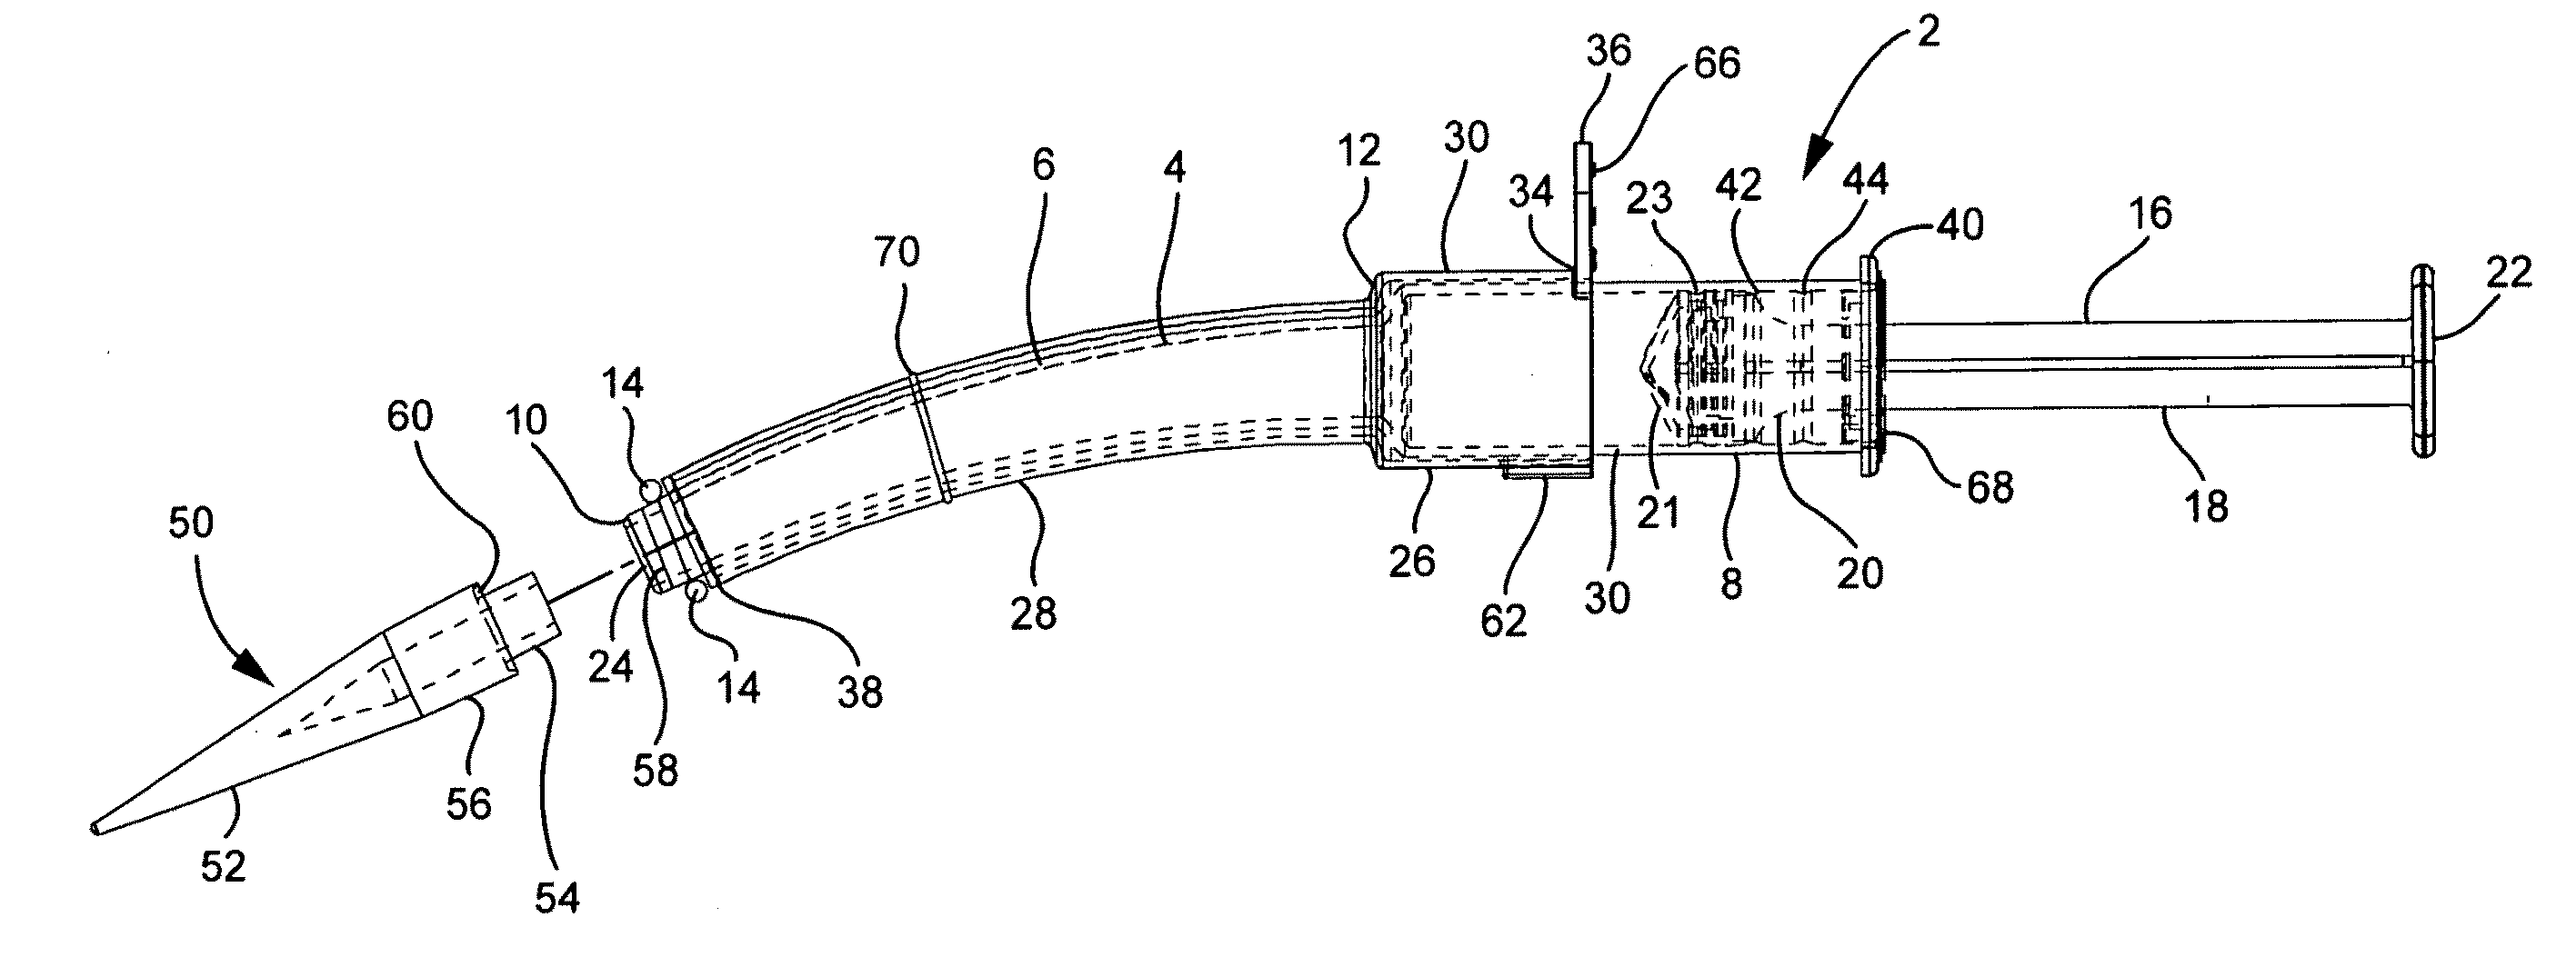 Elastic band ligation device and method for treatment of hemorrhoids